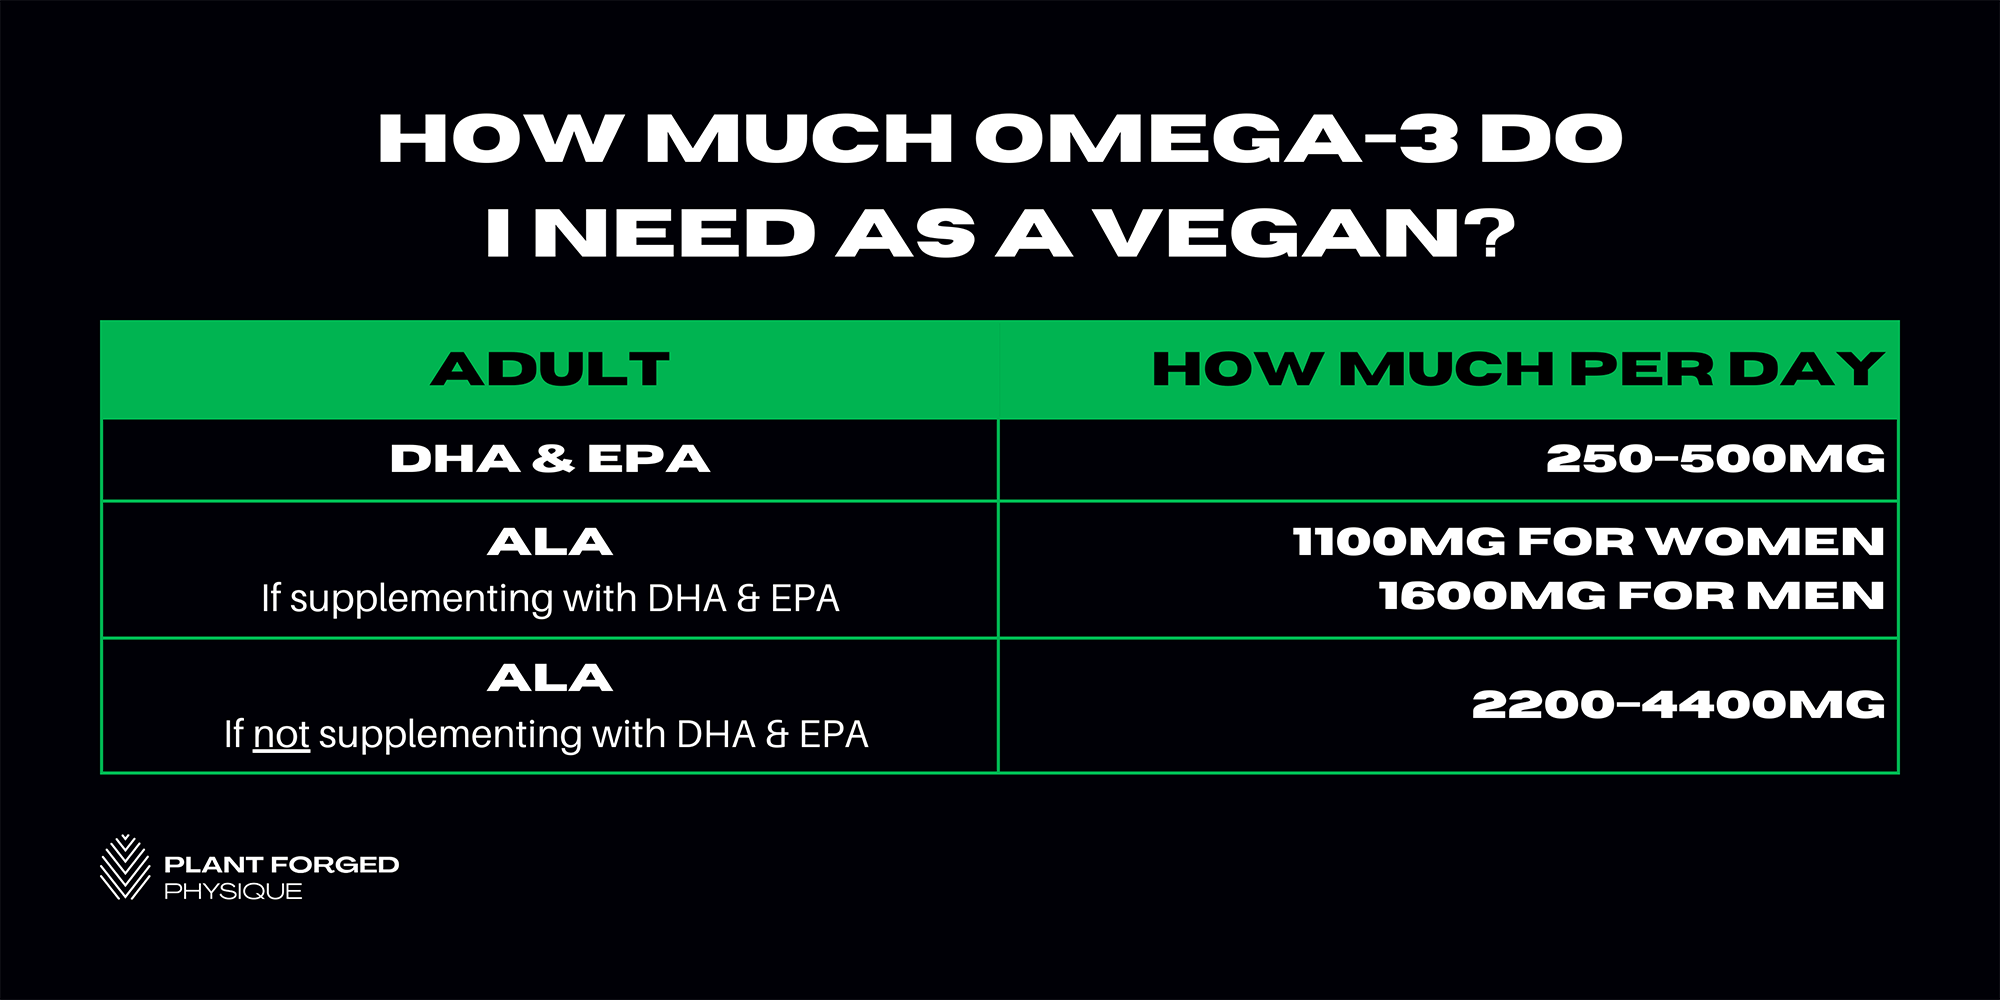 How much omega-3 do I need as a vegan?